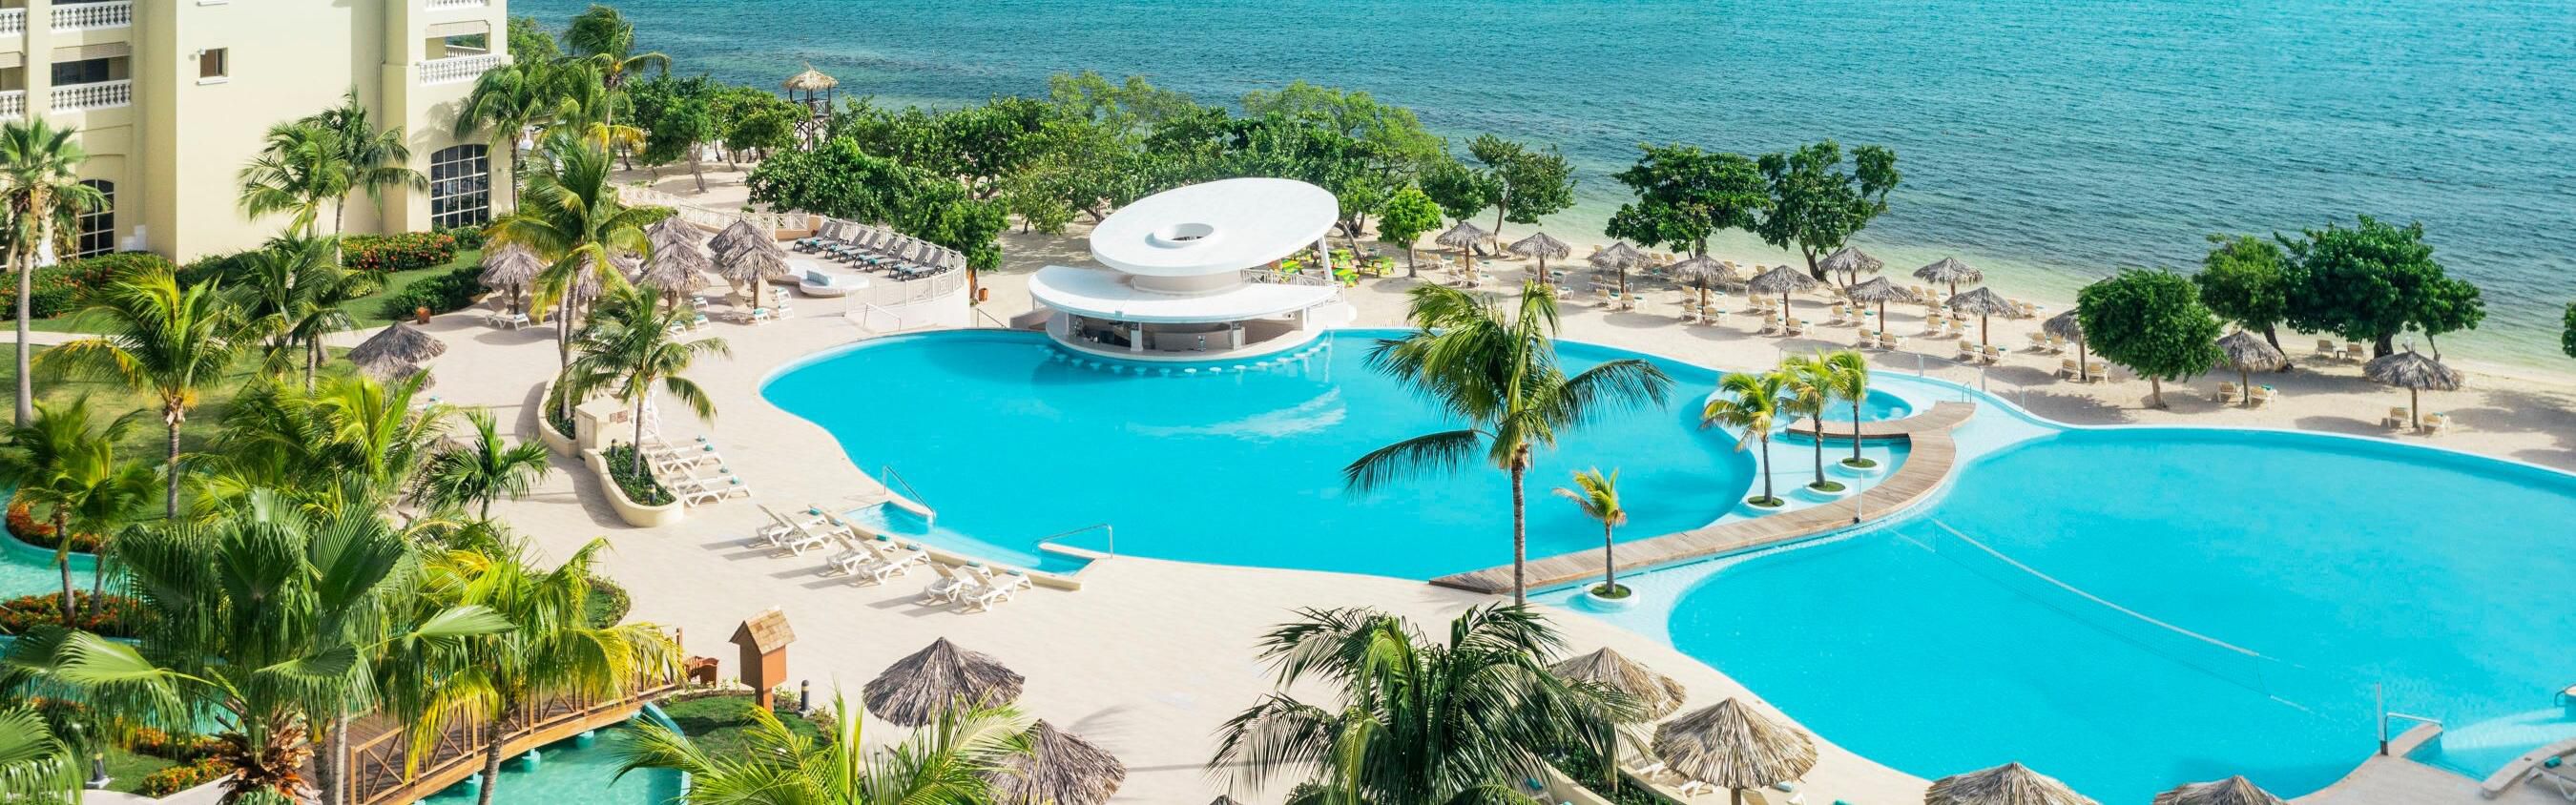 Montego Bay All-Inclusive Resorts - Jamaica Vacations